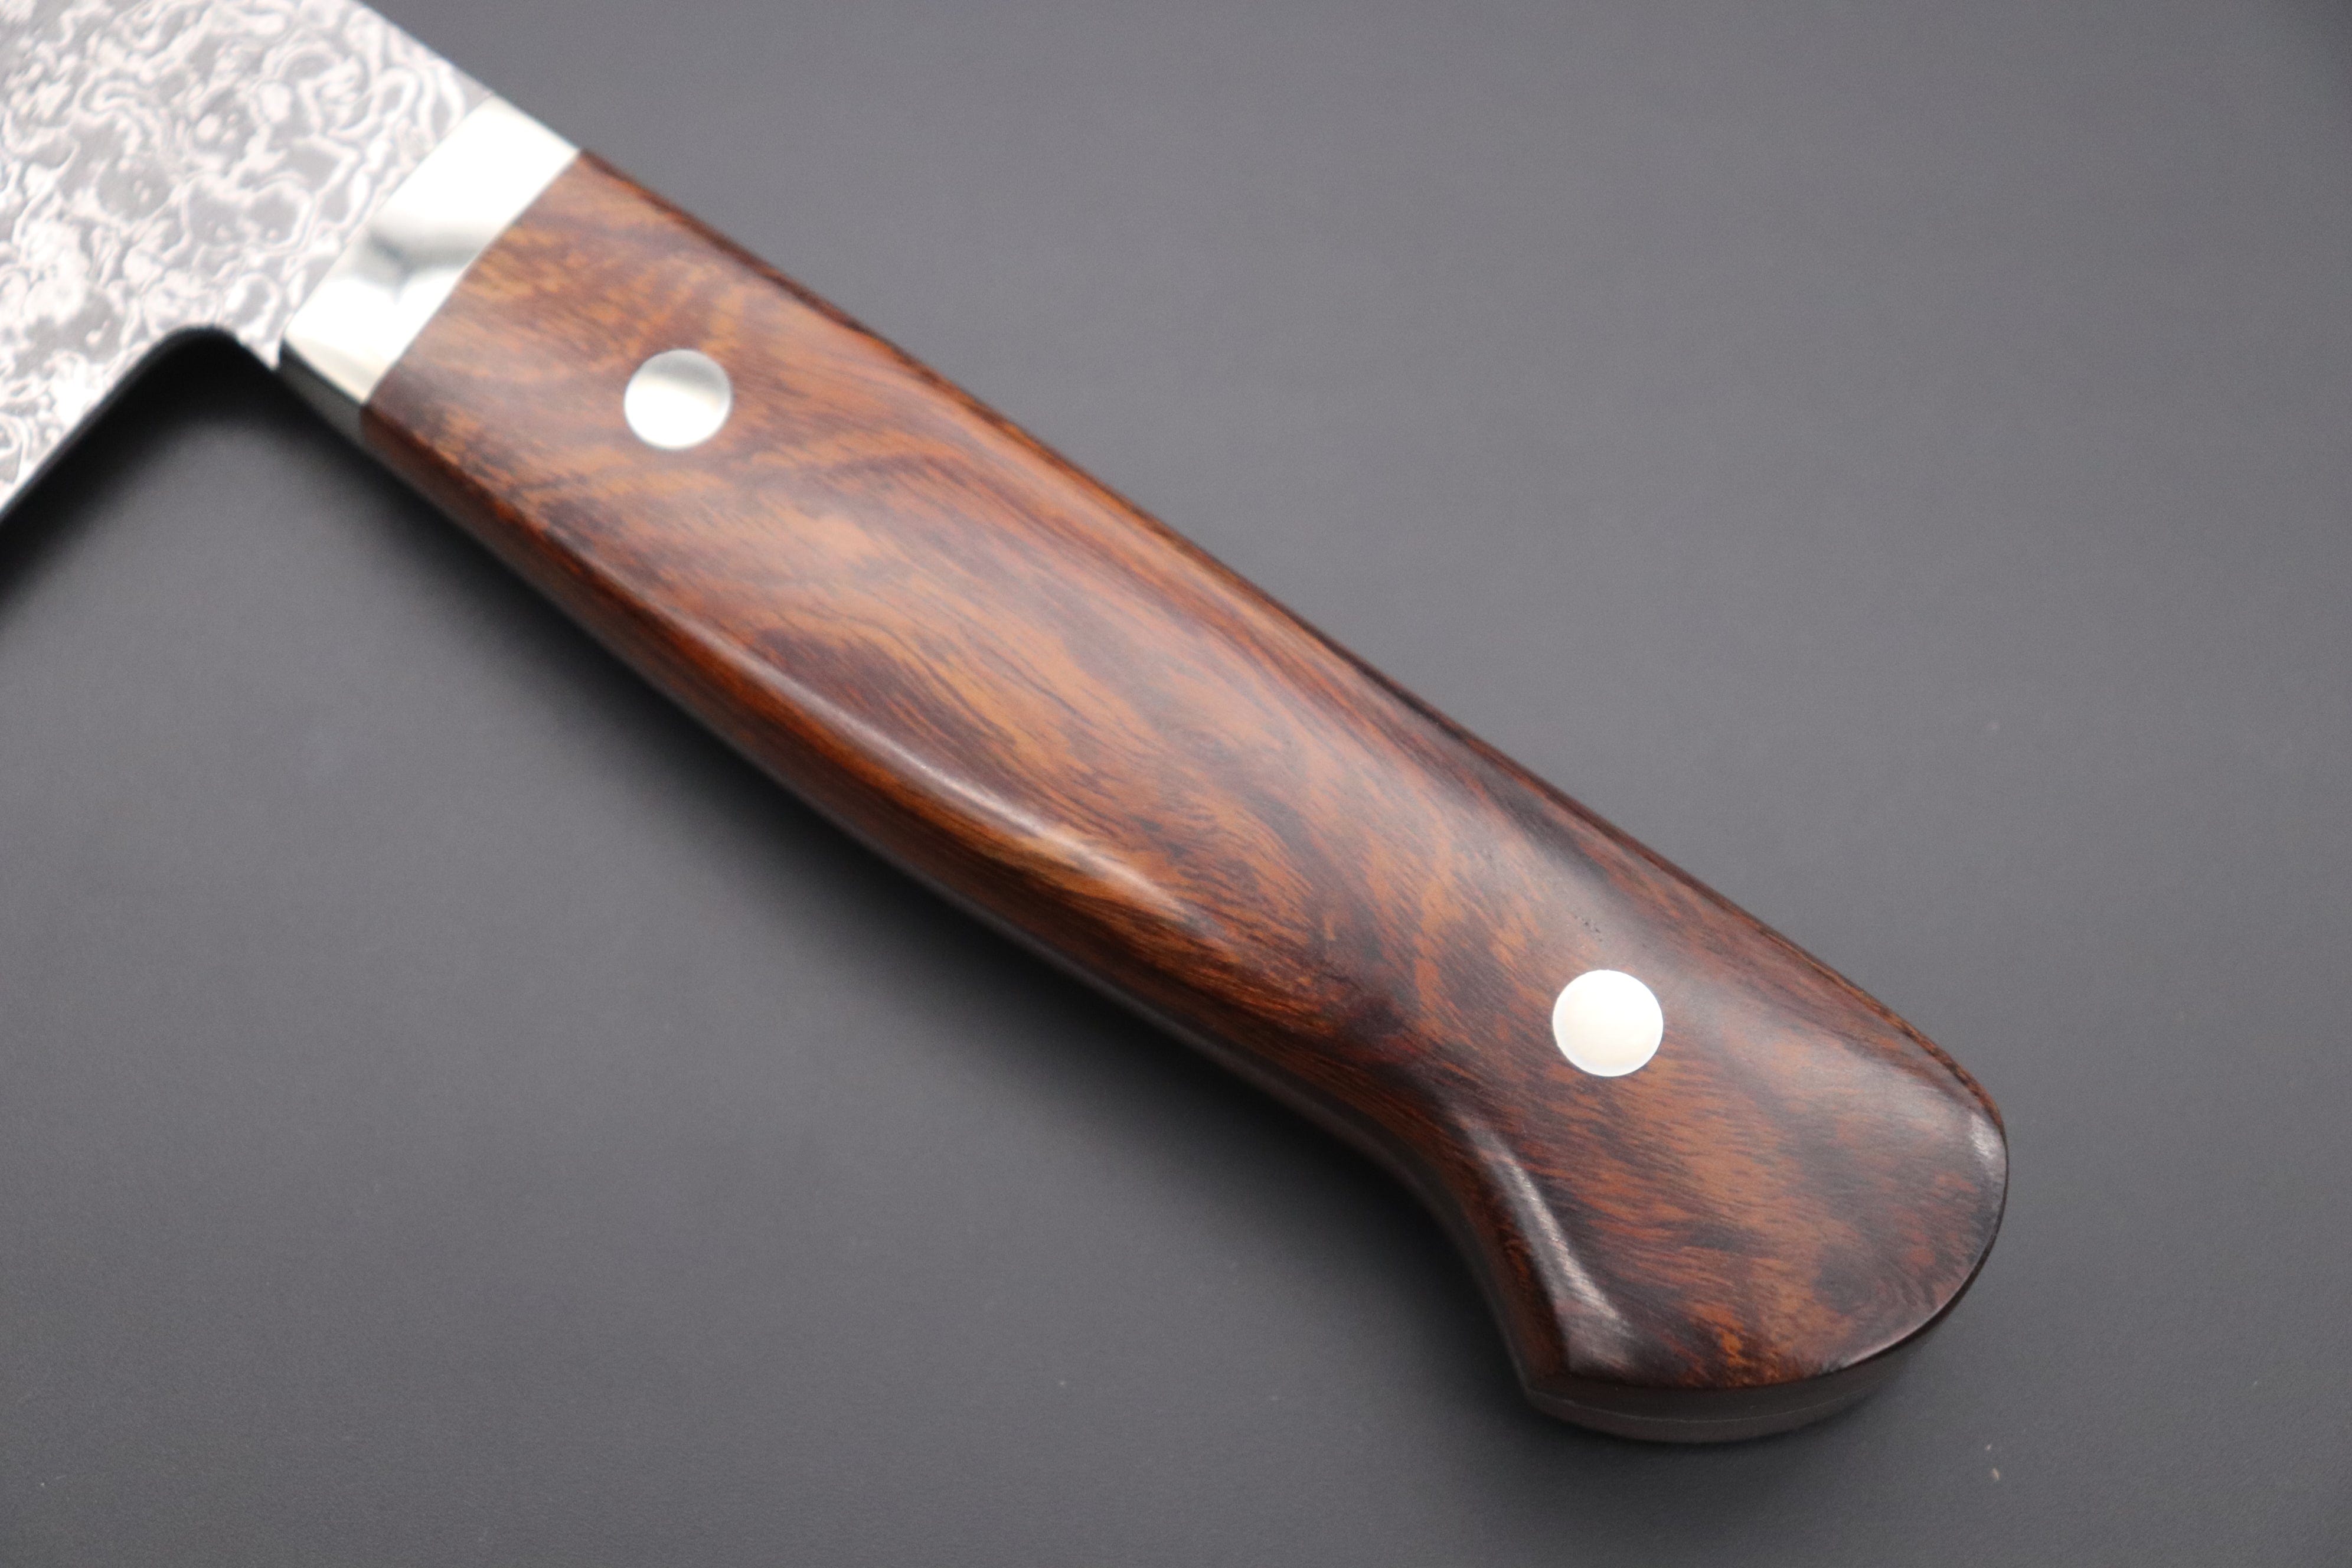 Desert Ironwood Knife Scales For Sale, Indy Hammered Knives